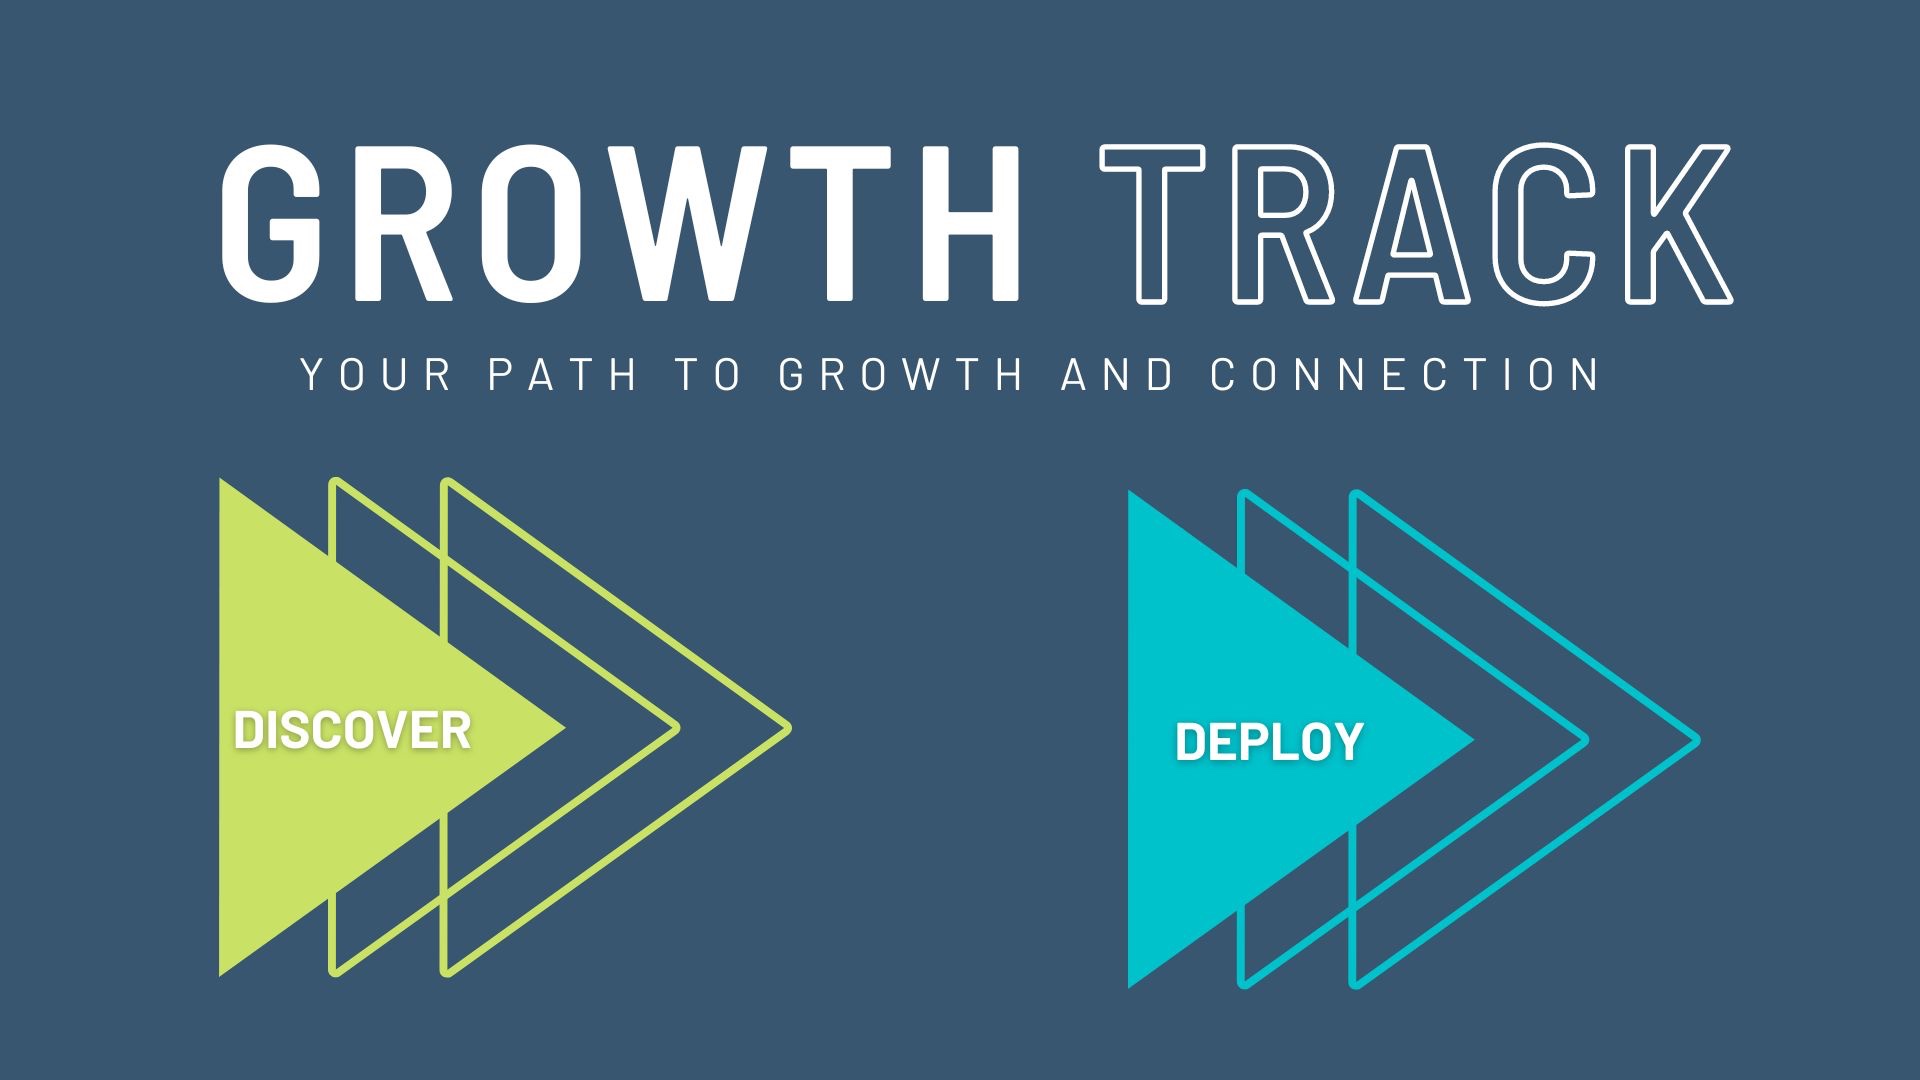 Growth Track - Your path to growth and connection. Discover and Deploy